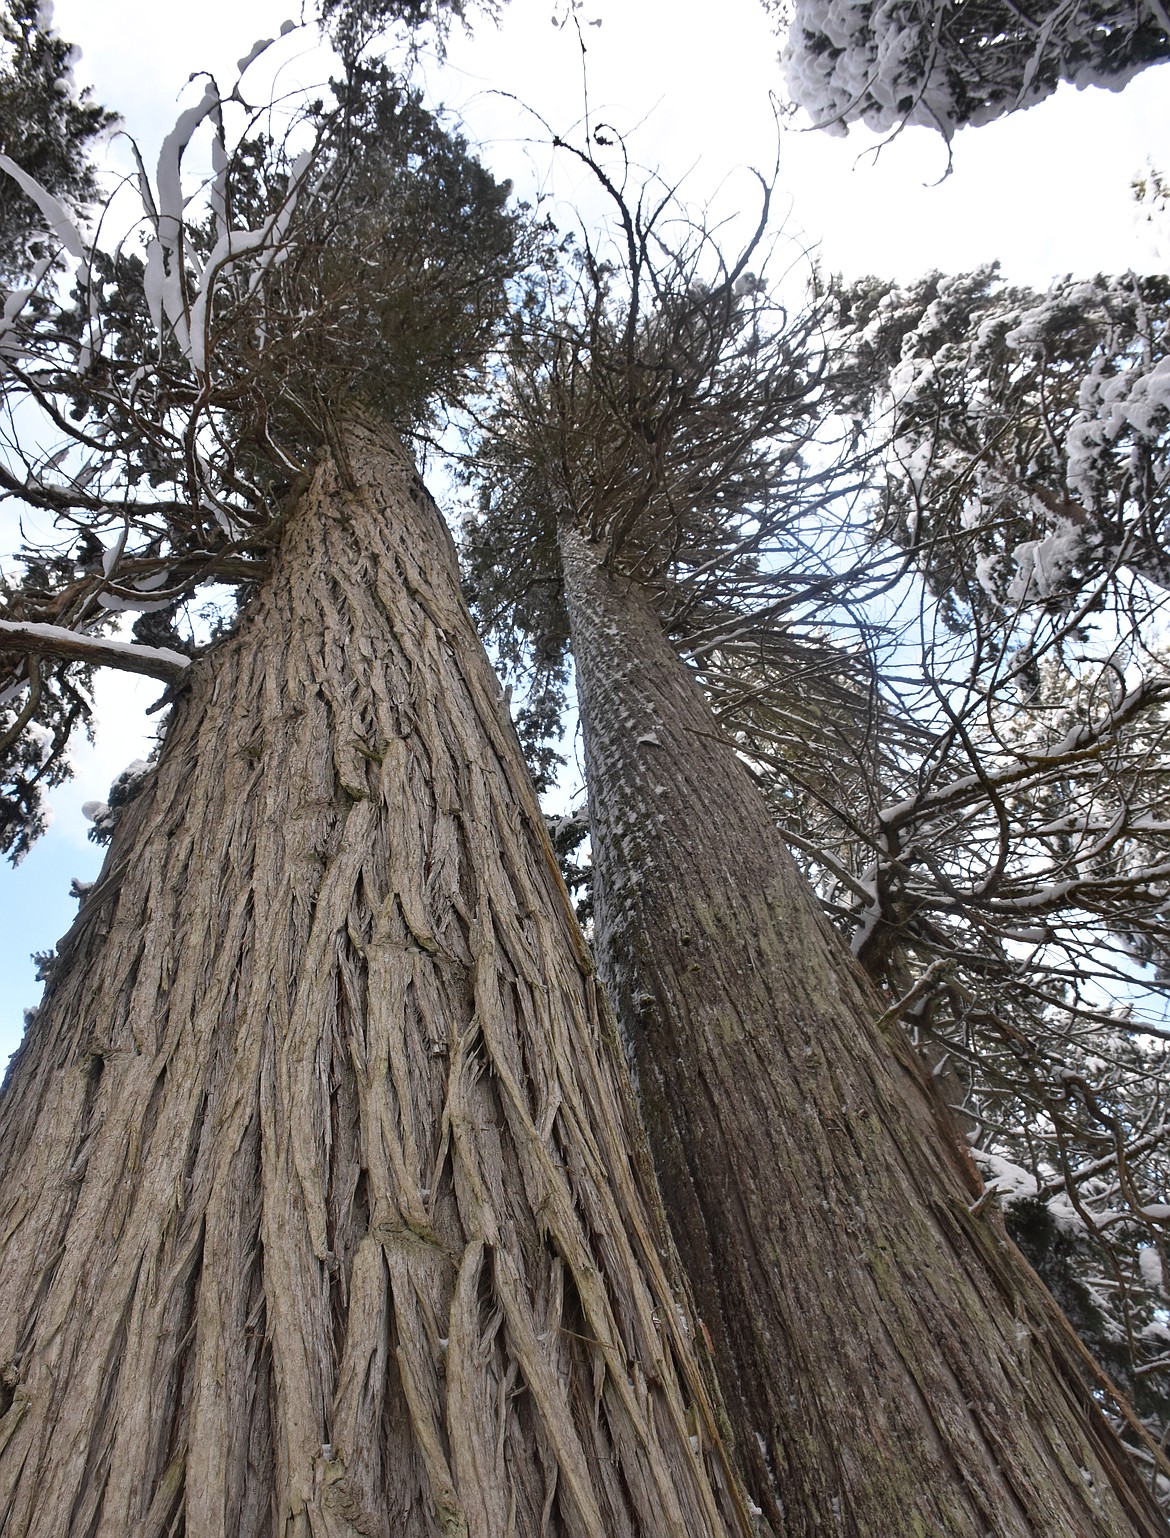 During the summer months, the grove of coniferous trees south of Troy better known as the Ross Creek Cedars is a popular destination spot, drawing visitors in by automobile. In winter, the towering western red cedars are best seen on skis or snowshoes. (Duncan Adams/The Western News)